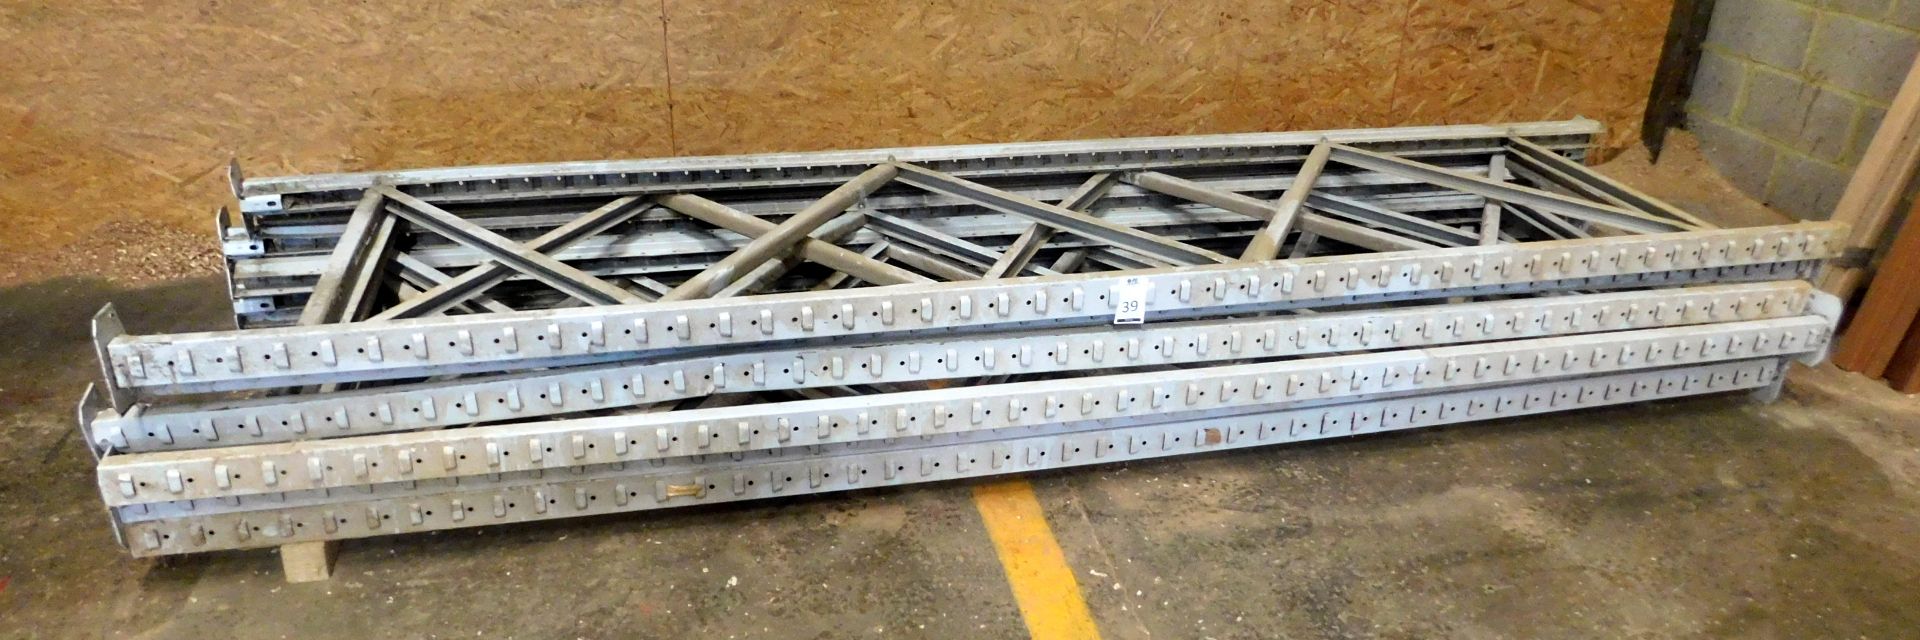 Six Pallet Racking End Frames (Collection Delayed to 12 noon on Thursday 21st February) (Located